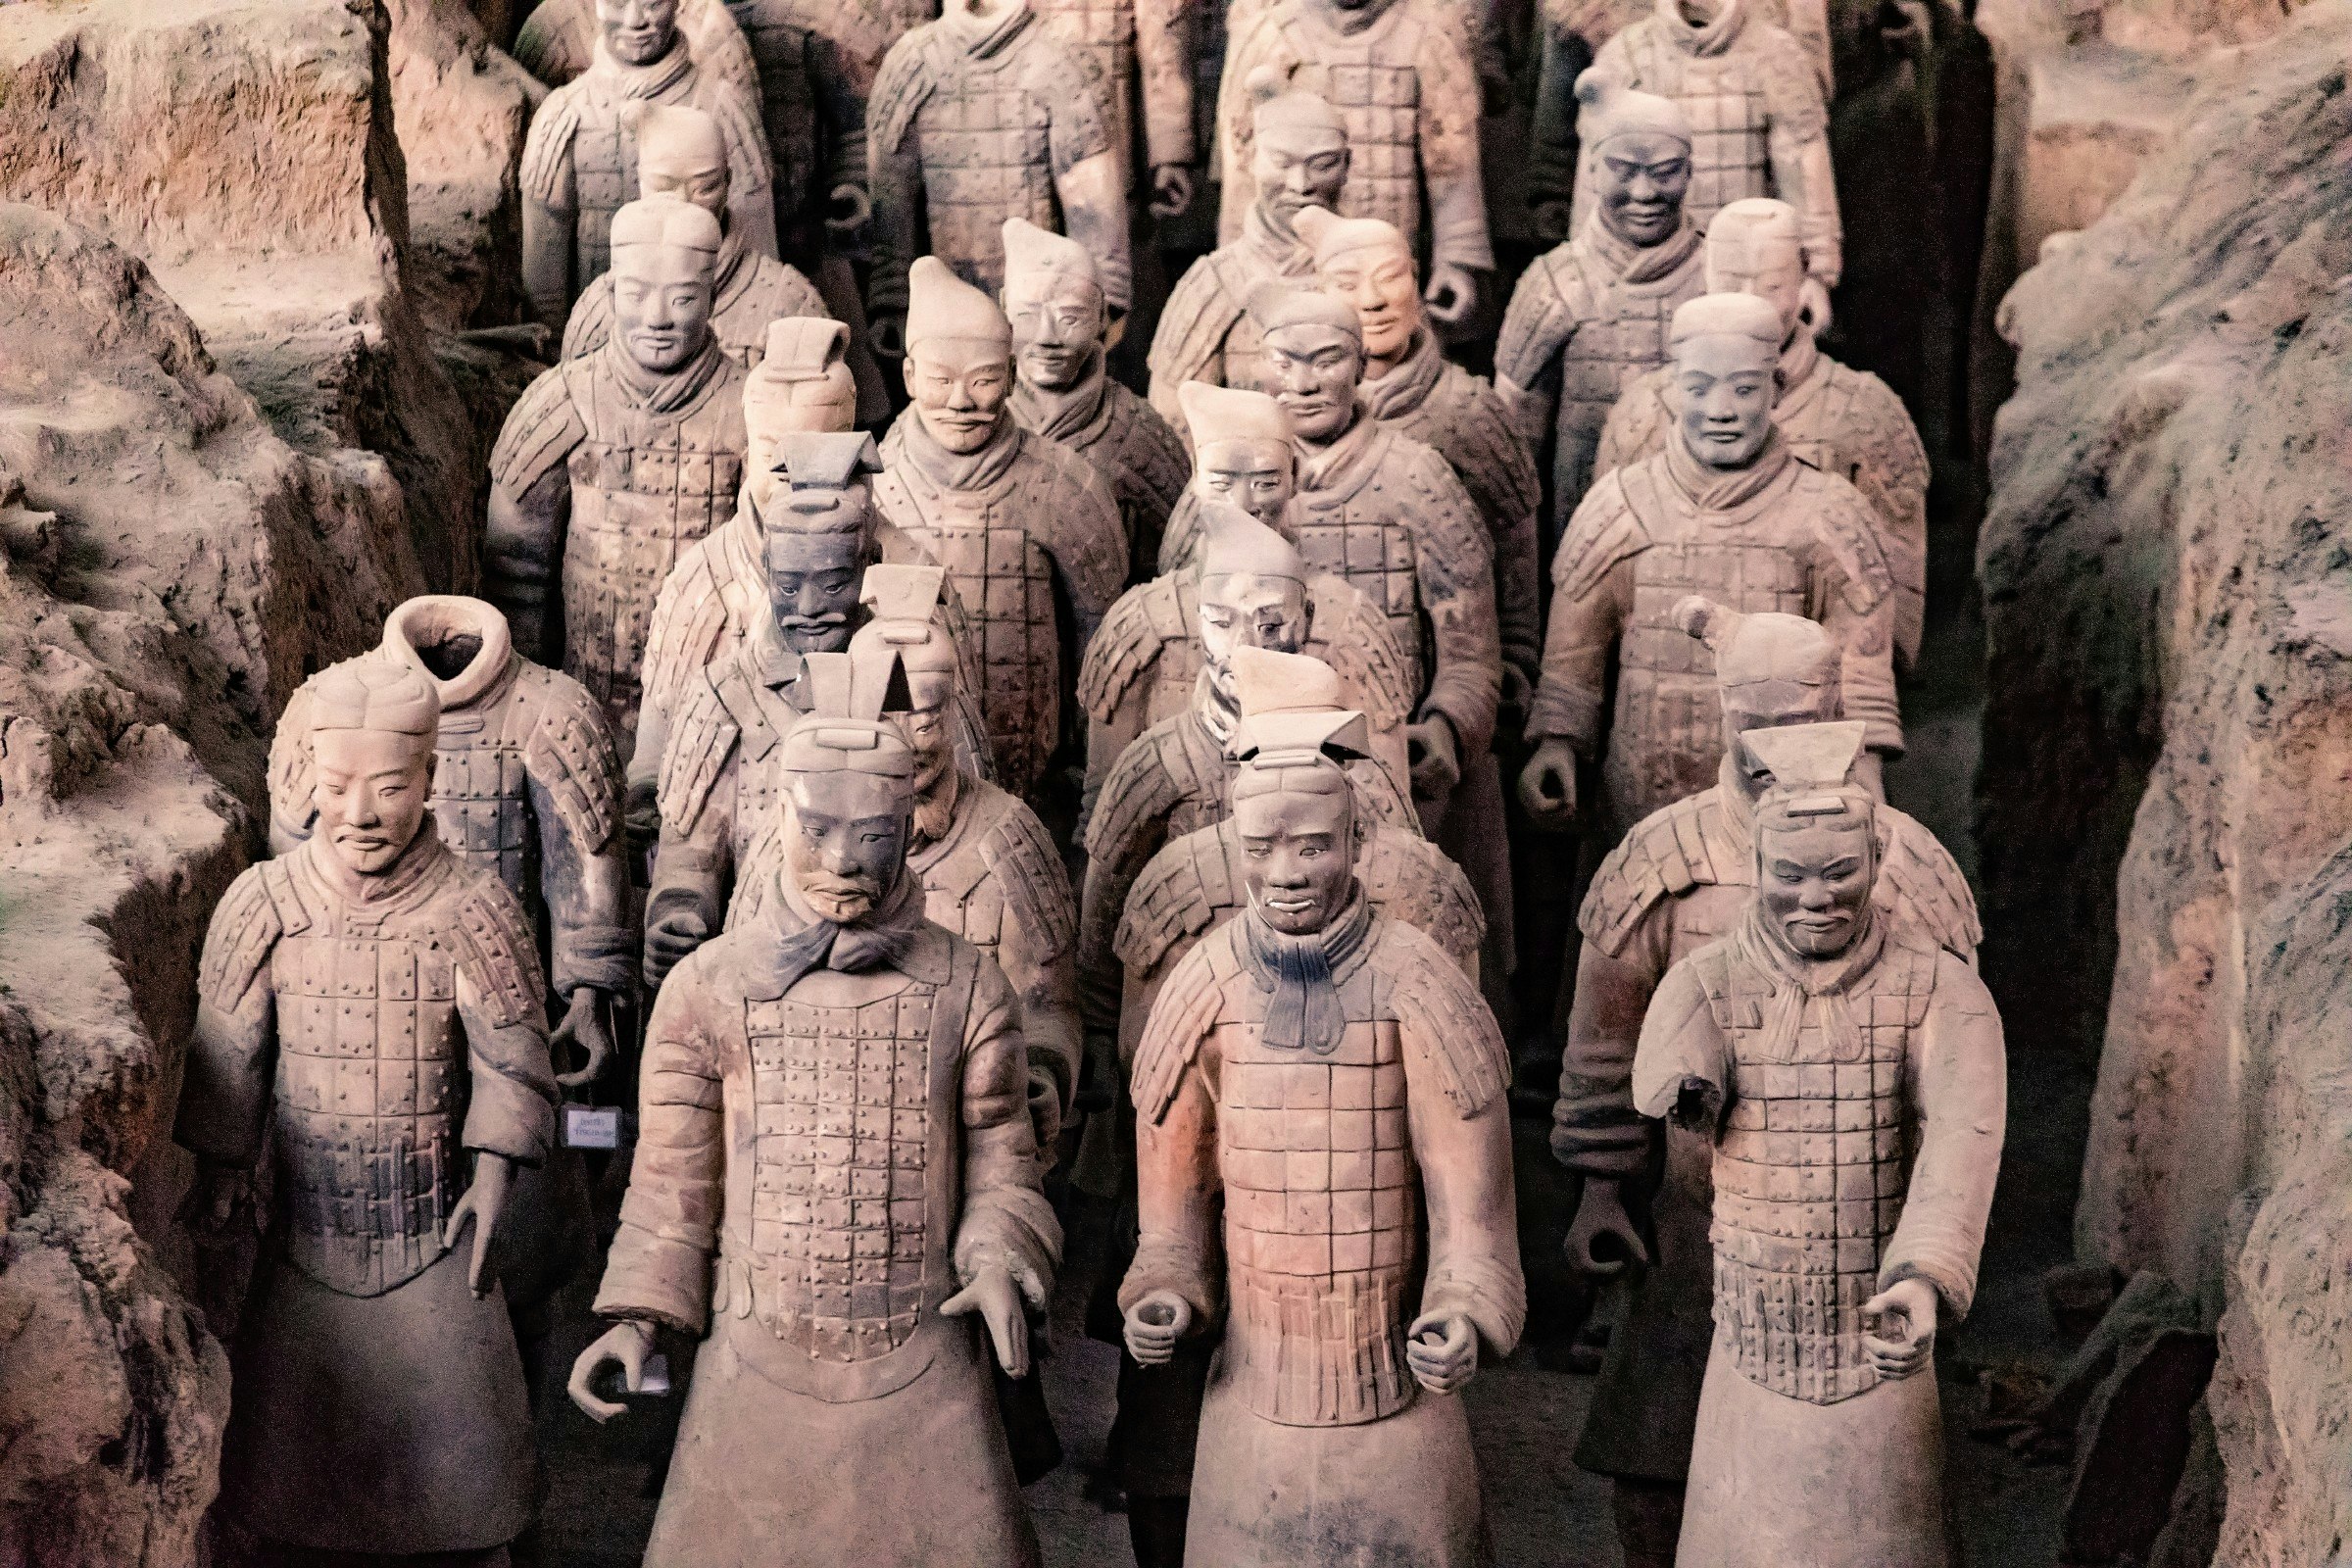 Rows of terracotta warriors at Emperor Qinshihuang's Mausoleum Site Museum